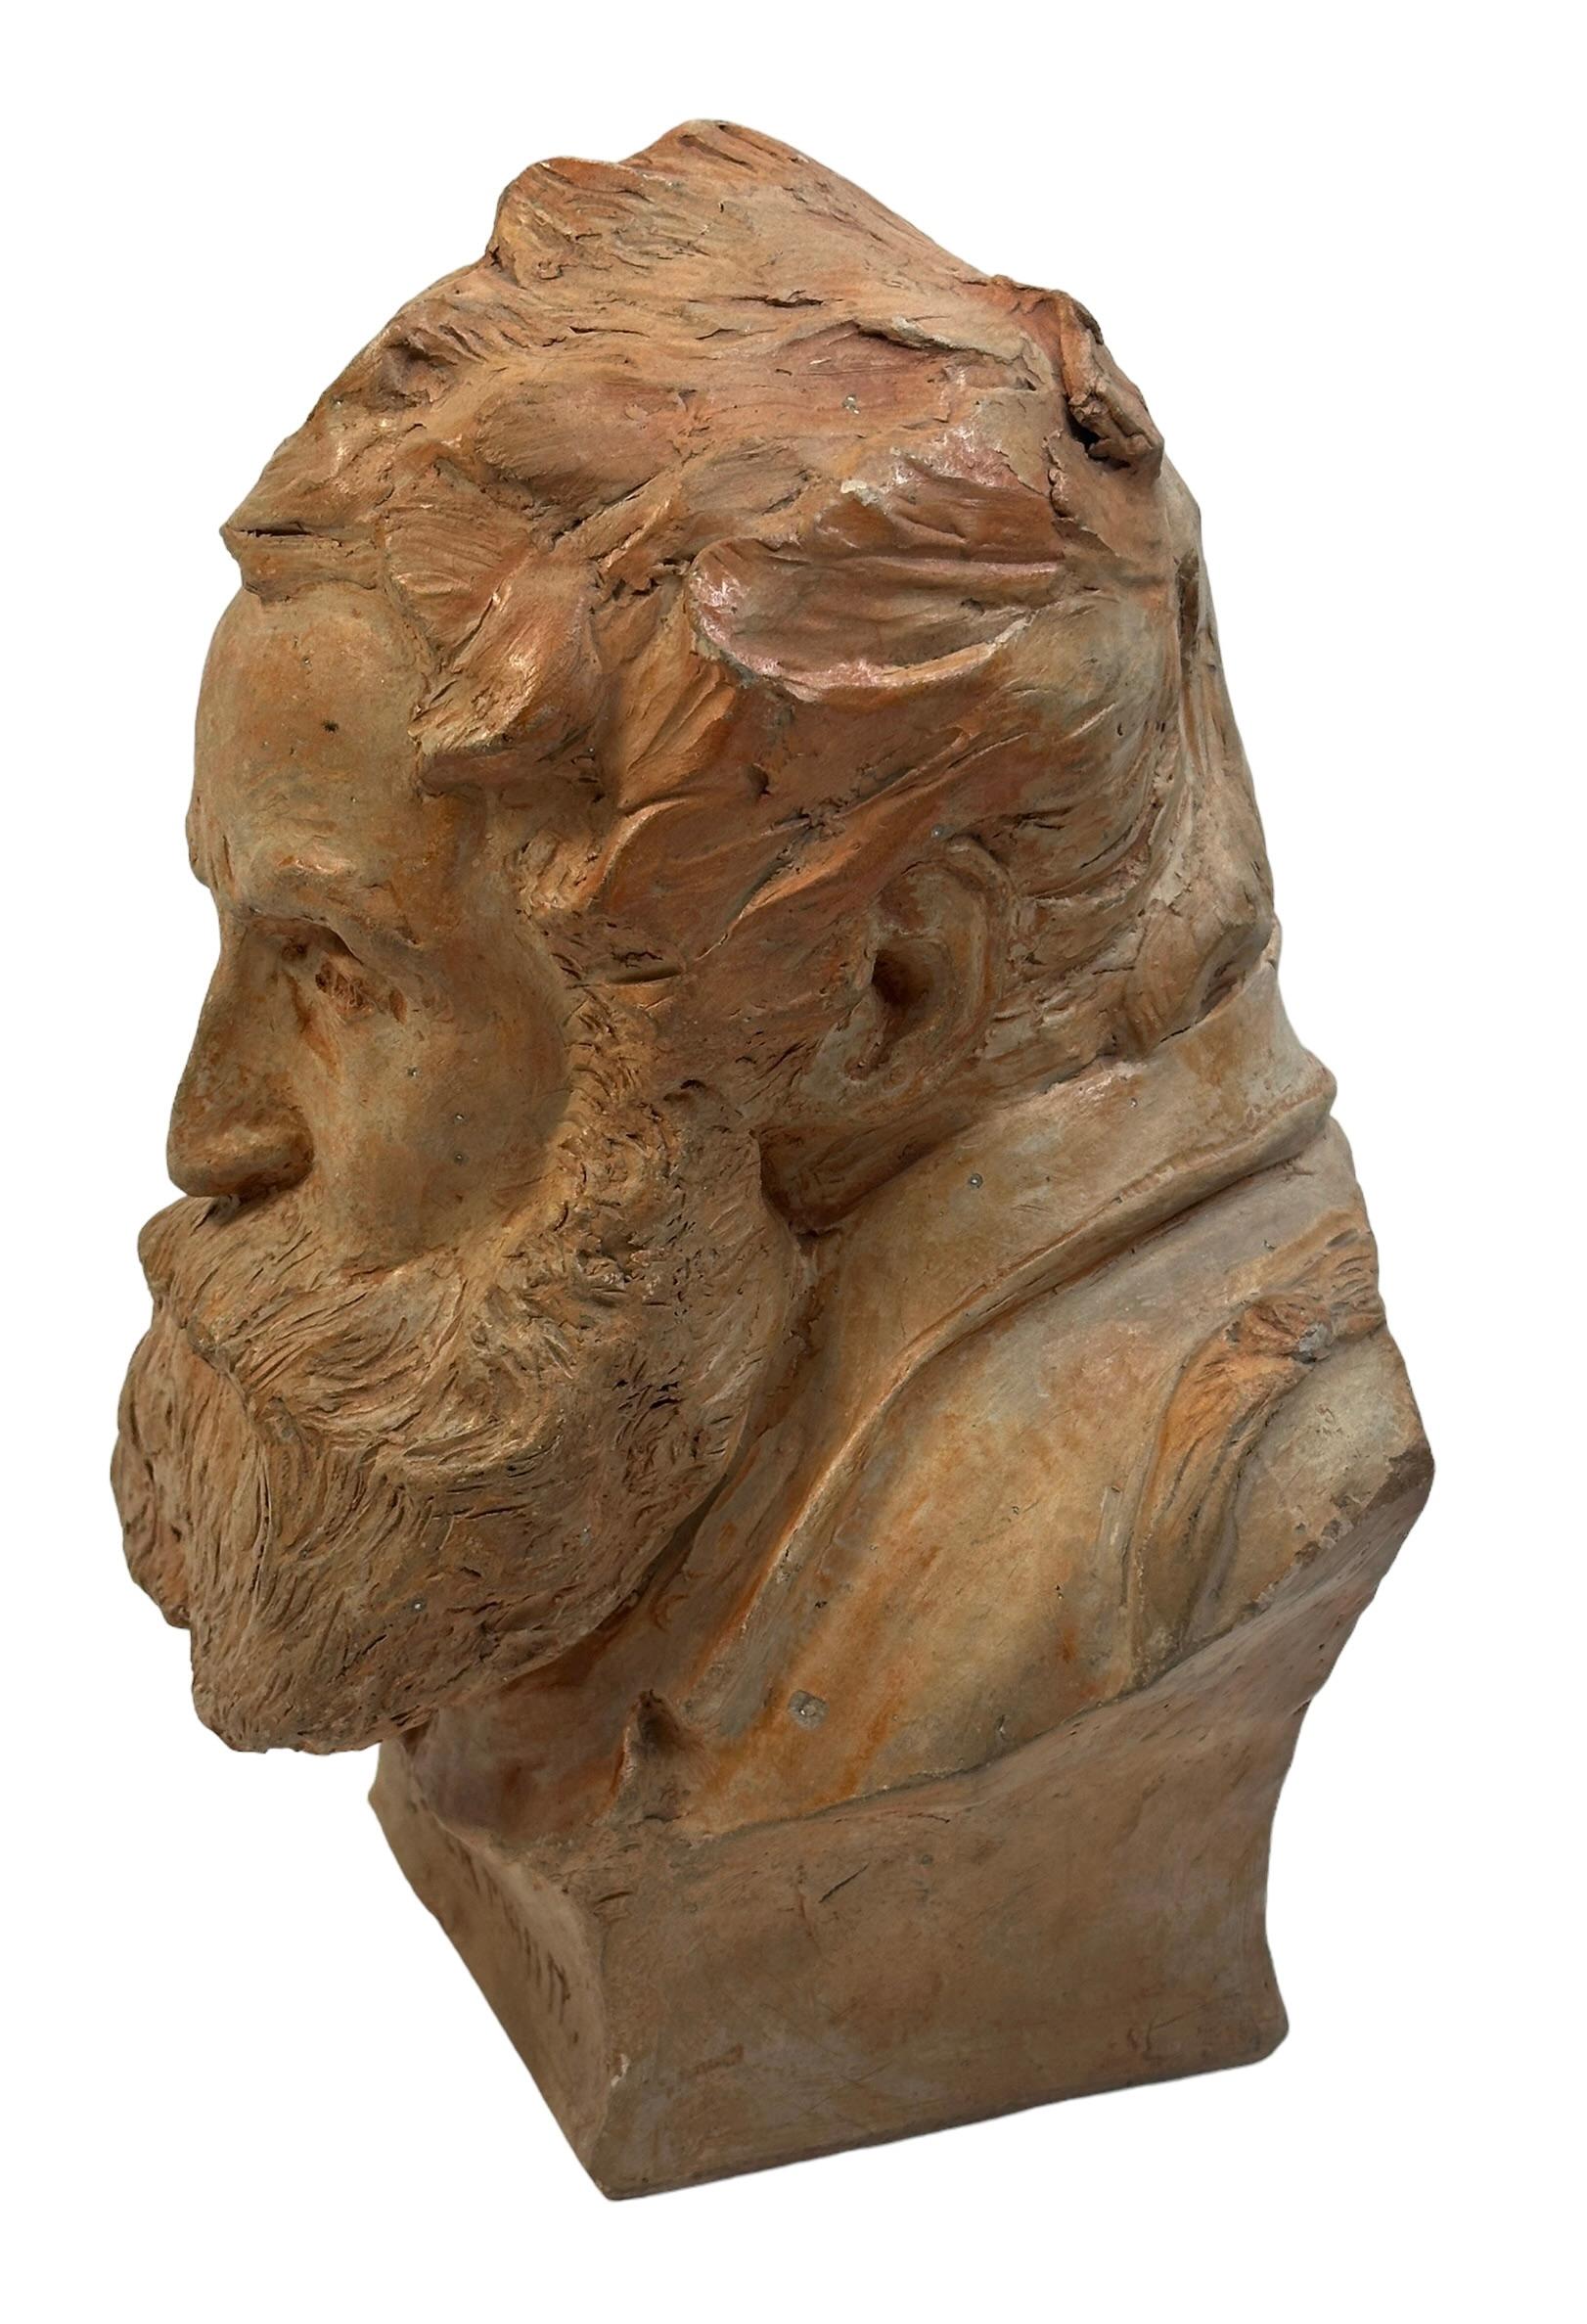 This is an impressive bust formed with terracotta of an old man. This beautiful sculpture is hand formed, 20th century. Signed by Artist and dated 1936. It makes a nice addition to any room. Found at an Estate Sale in Nuremberg, Germany.